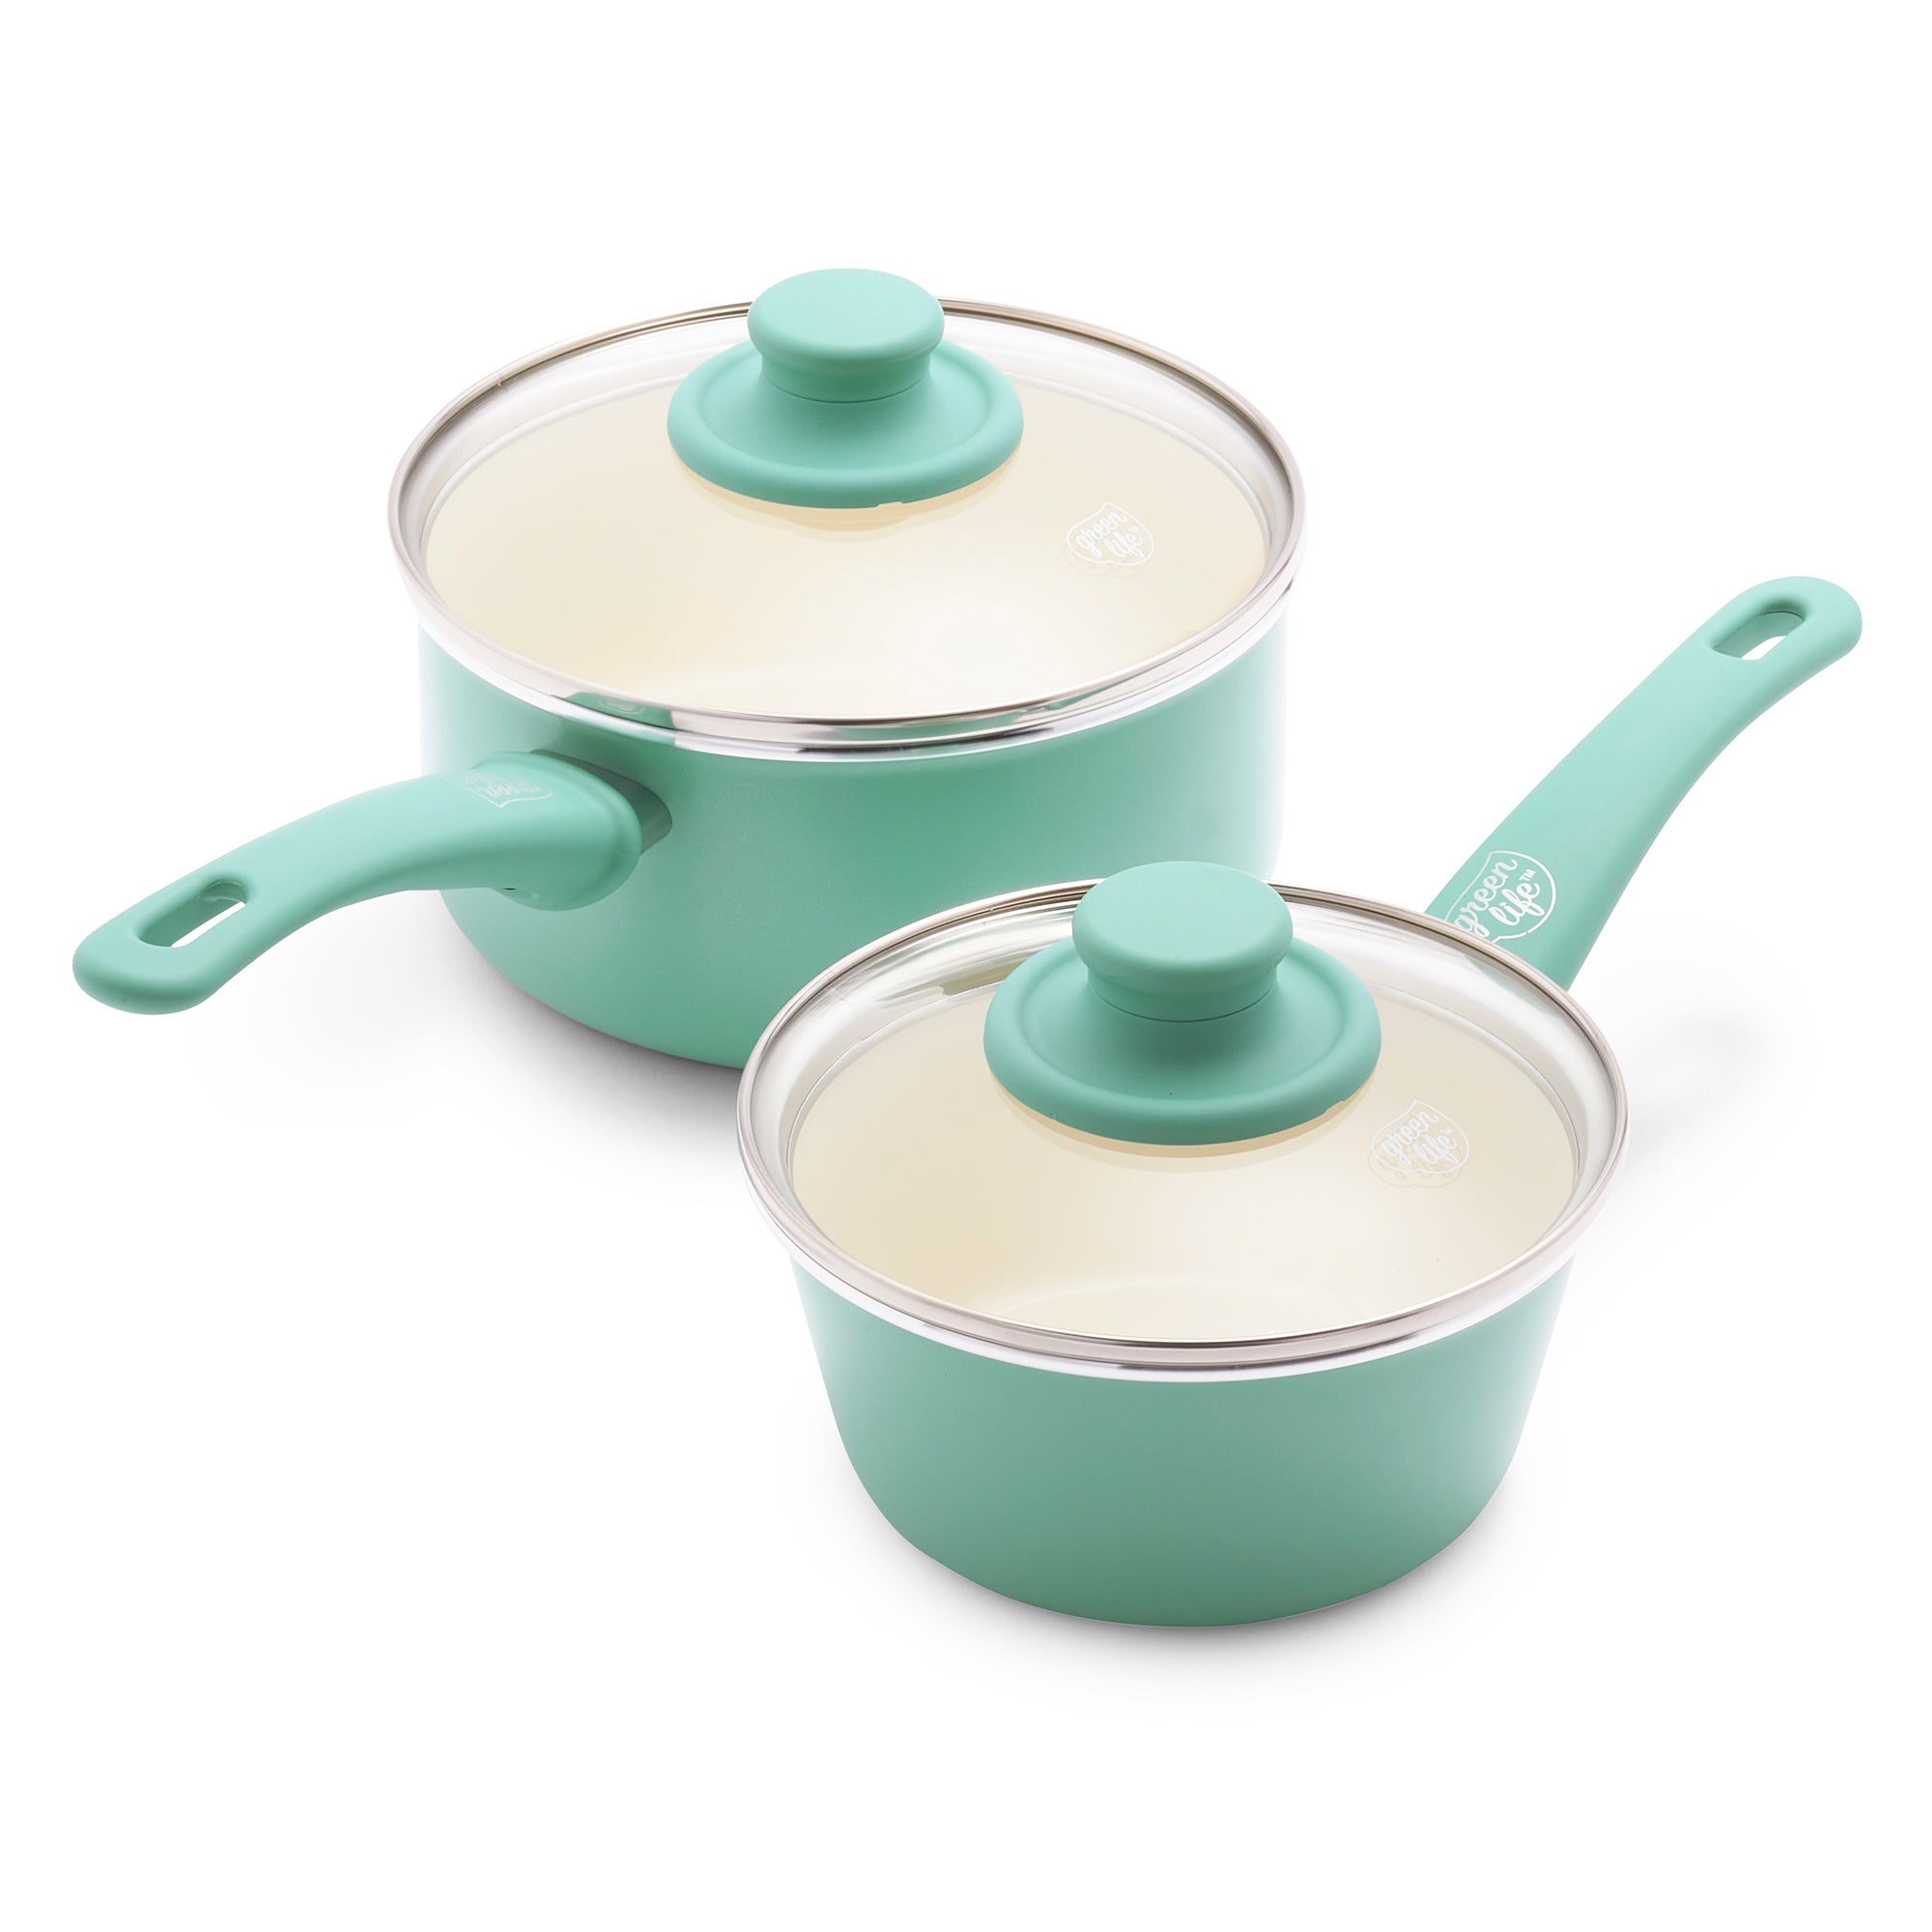  GreenLife Soft Grip Healthy Ceramic Nonstick 16 Piece Kitchen Cookware  Pots and Frying Sauce Pans Set, PFAS-Free, Dishwasher Safe, Turquoise: Home  & Kitchen